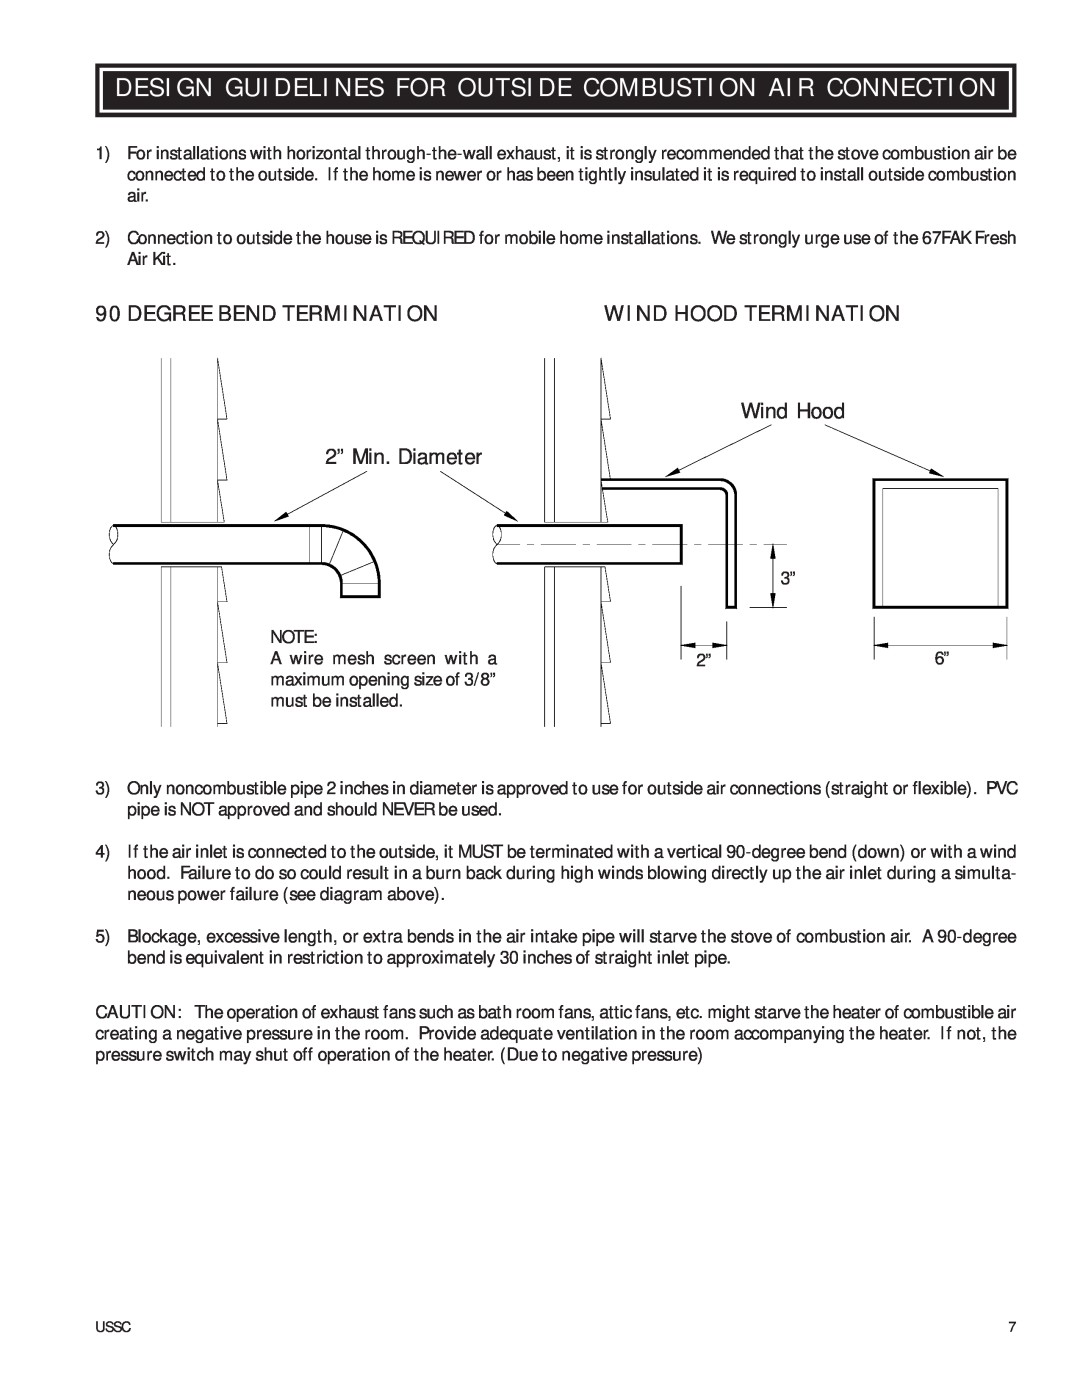 United States Stove 6037 owner manual Design Guidelines For Outside Combustion Air Connection, Degree Bend Termination 